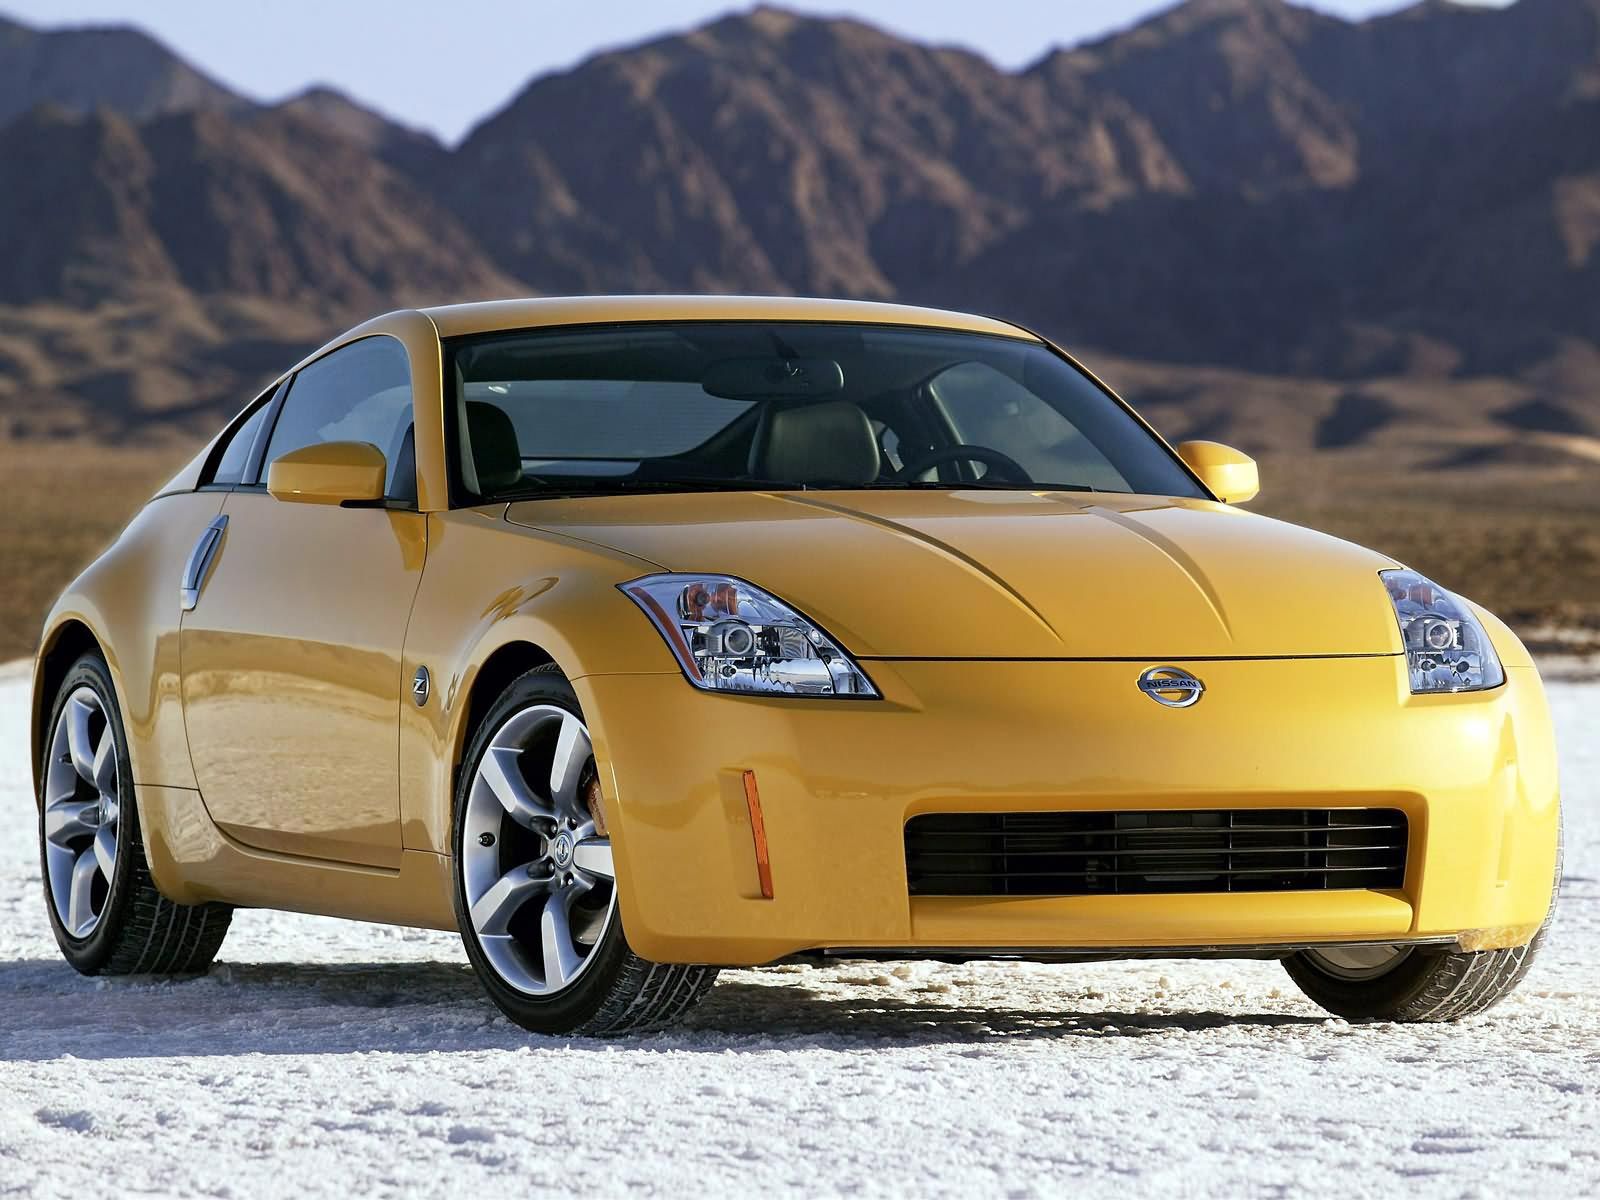 Ultra Yellow 2003 Nissan 350Z parked on a snow-covered surface